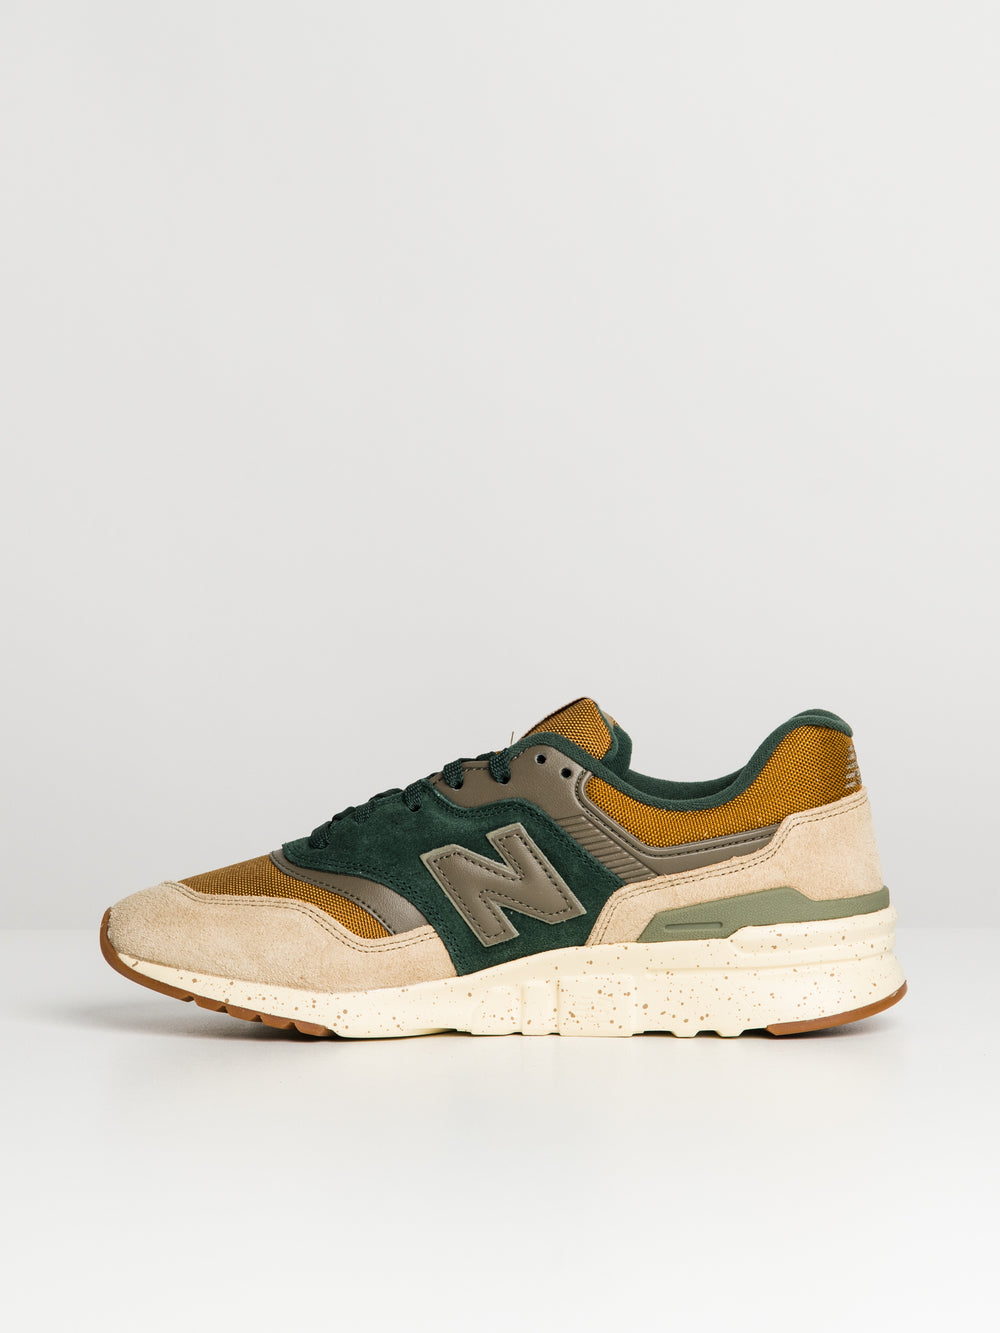  SNEAKER THE 997 POUR HOMME